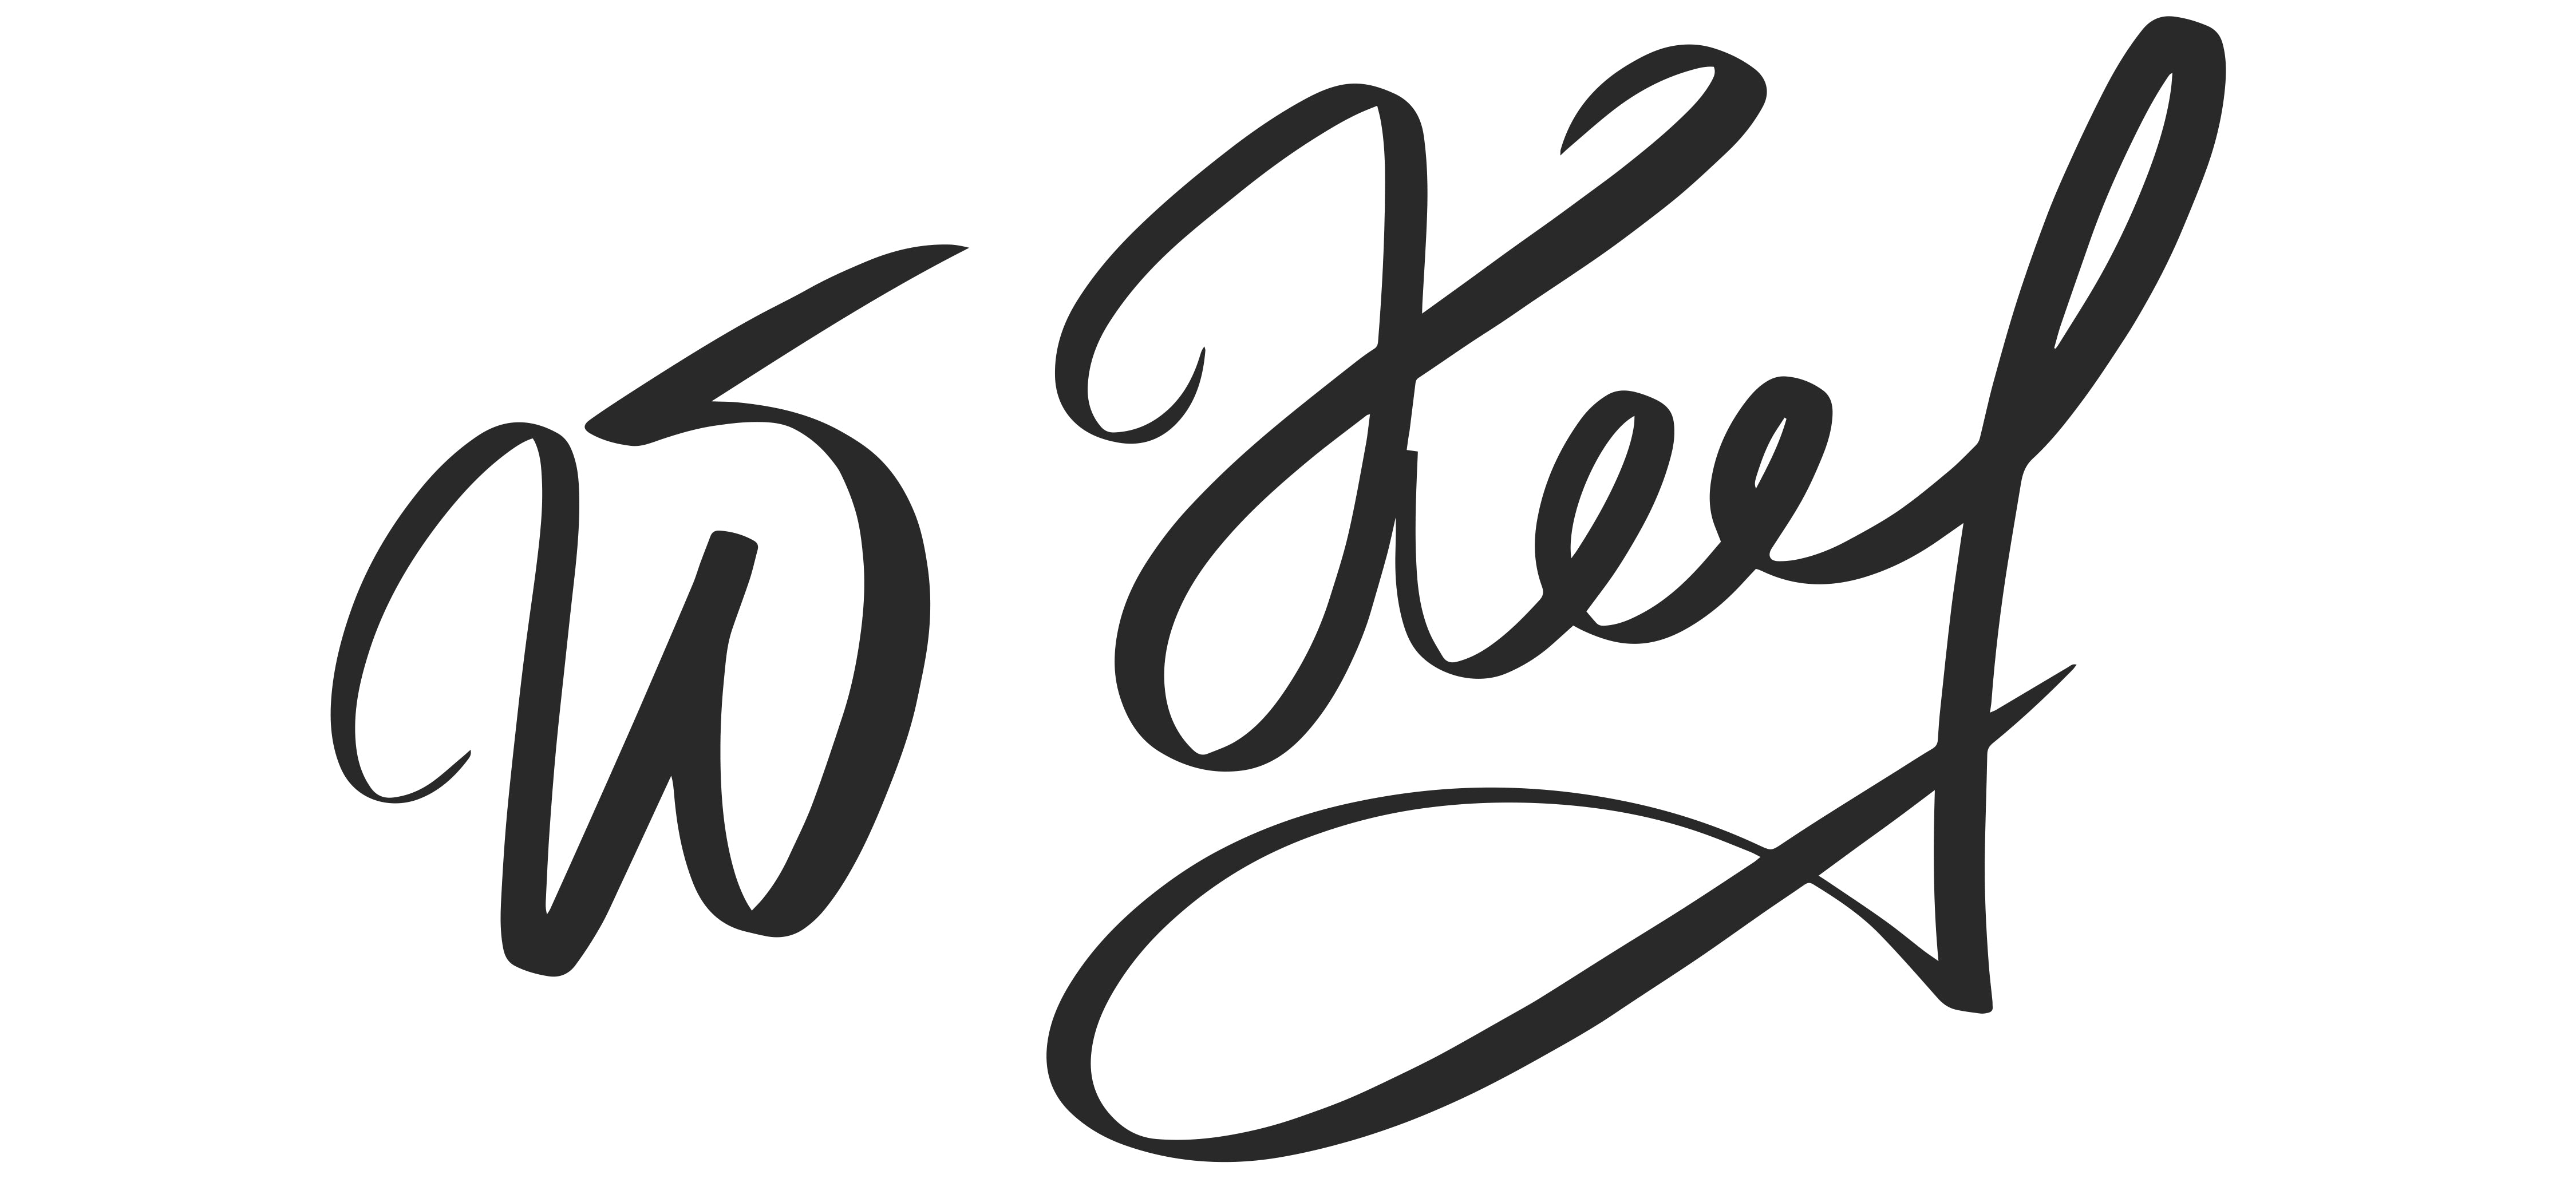 According to signature analysis experts, the legibility of your signature isn’t just about your penmanship. It also speaks of how open you are as a person.